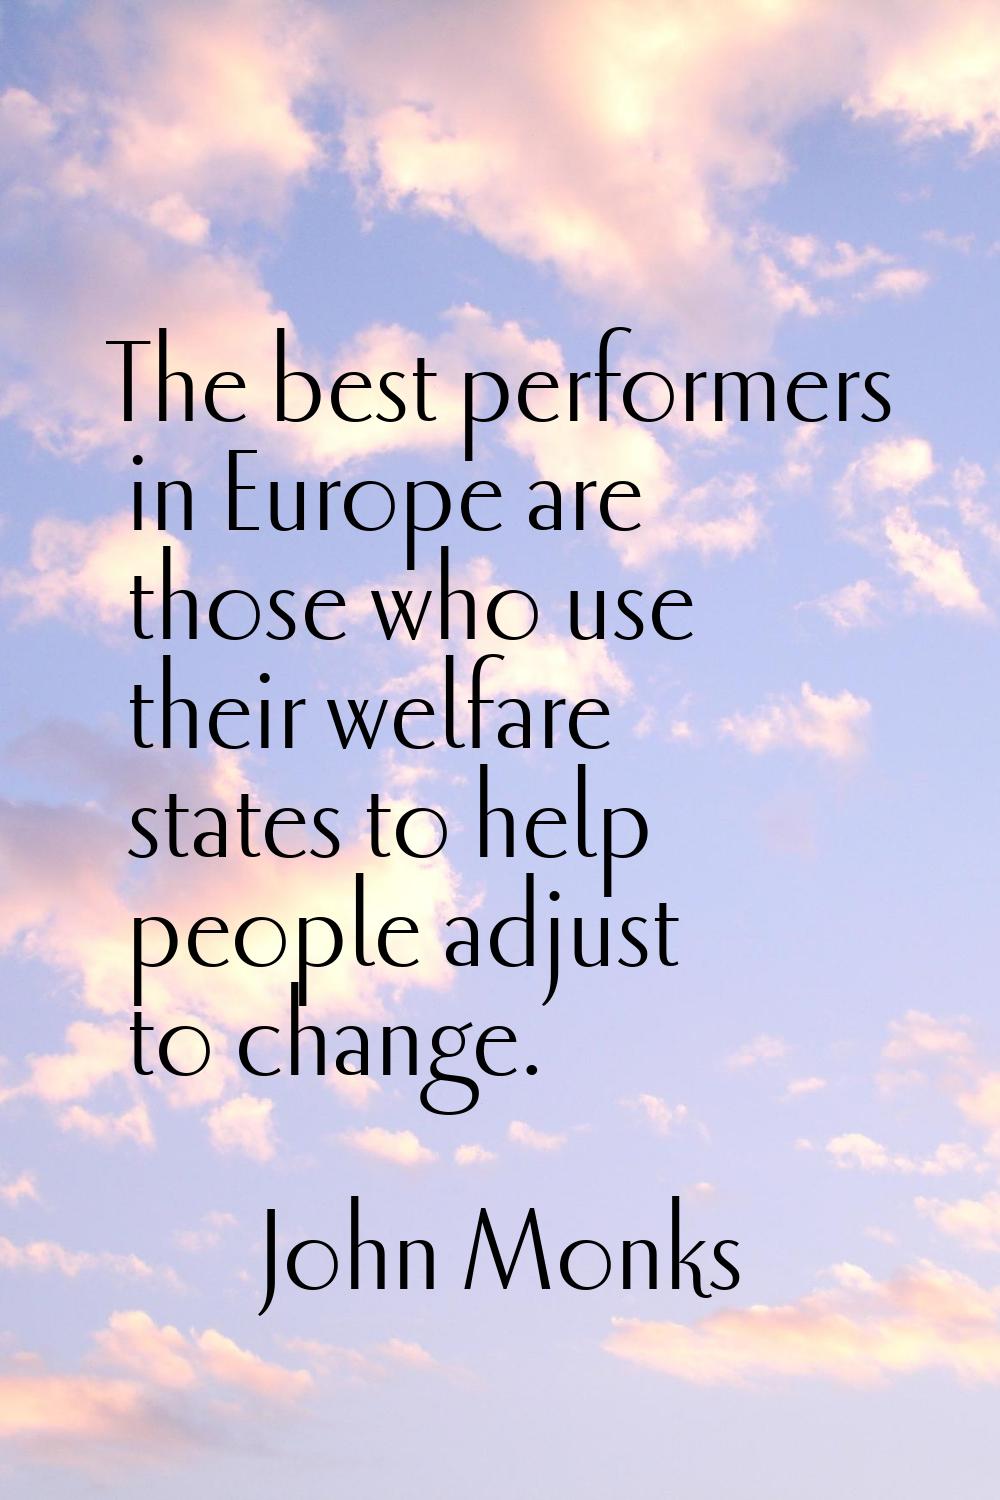 The best performers in Europe are those who use their welfare states to help people adjust to chang